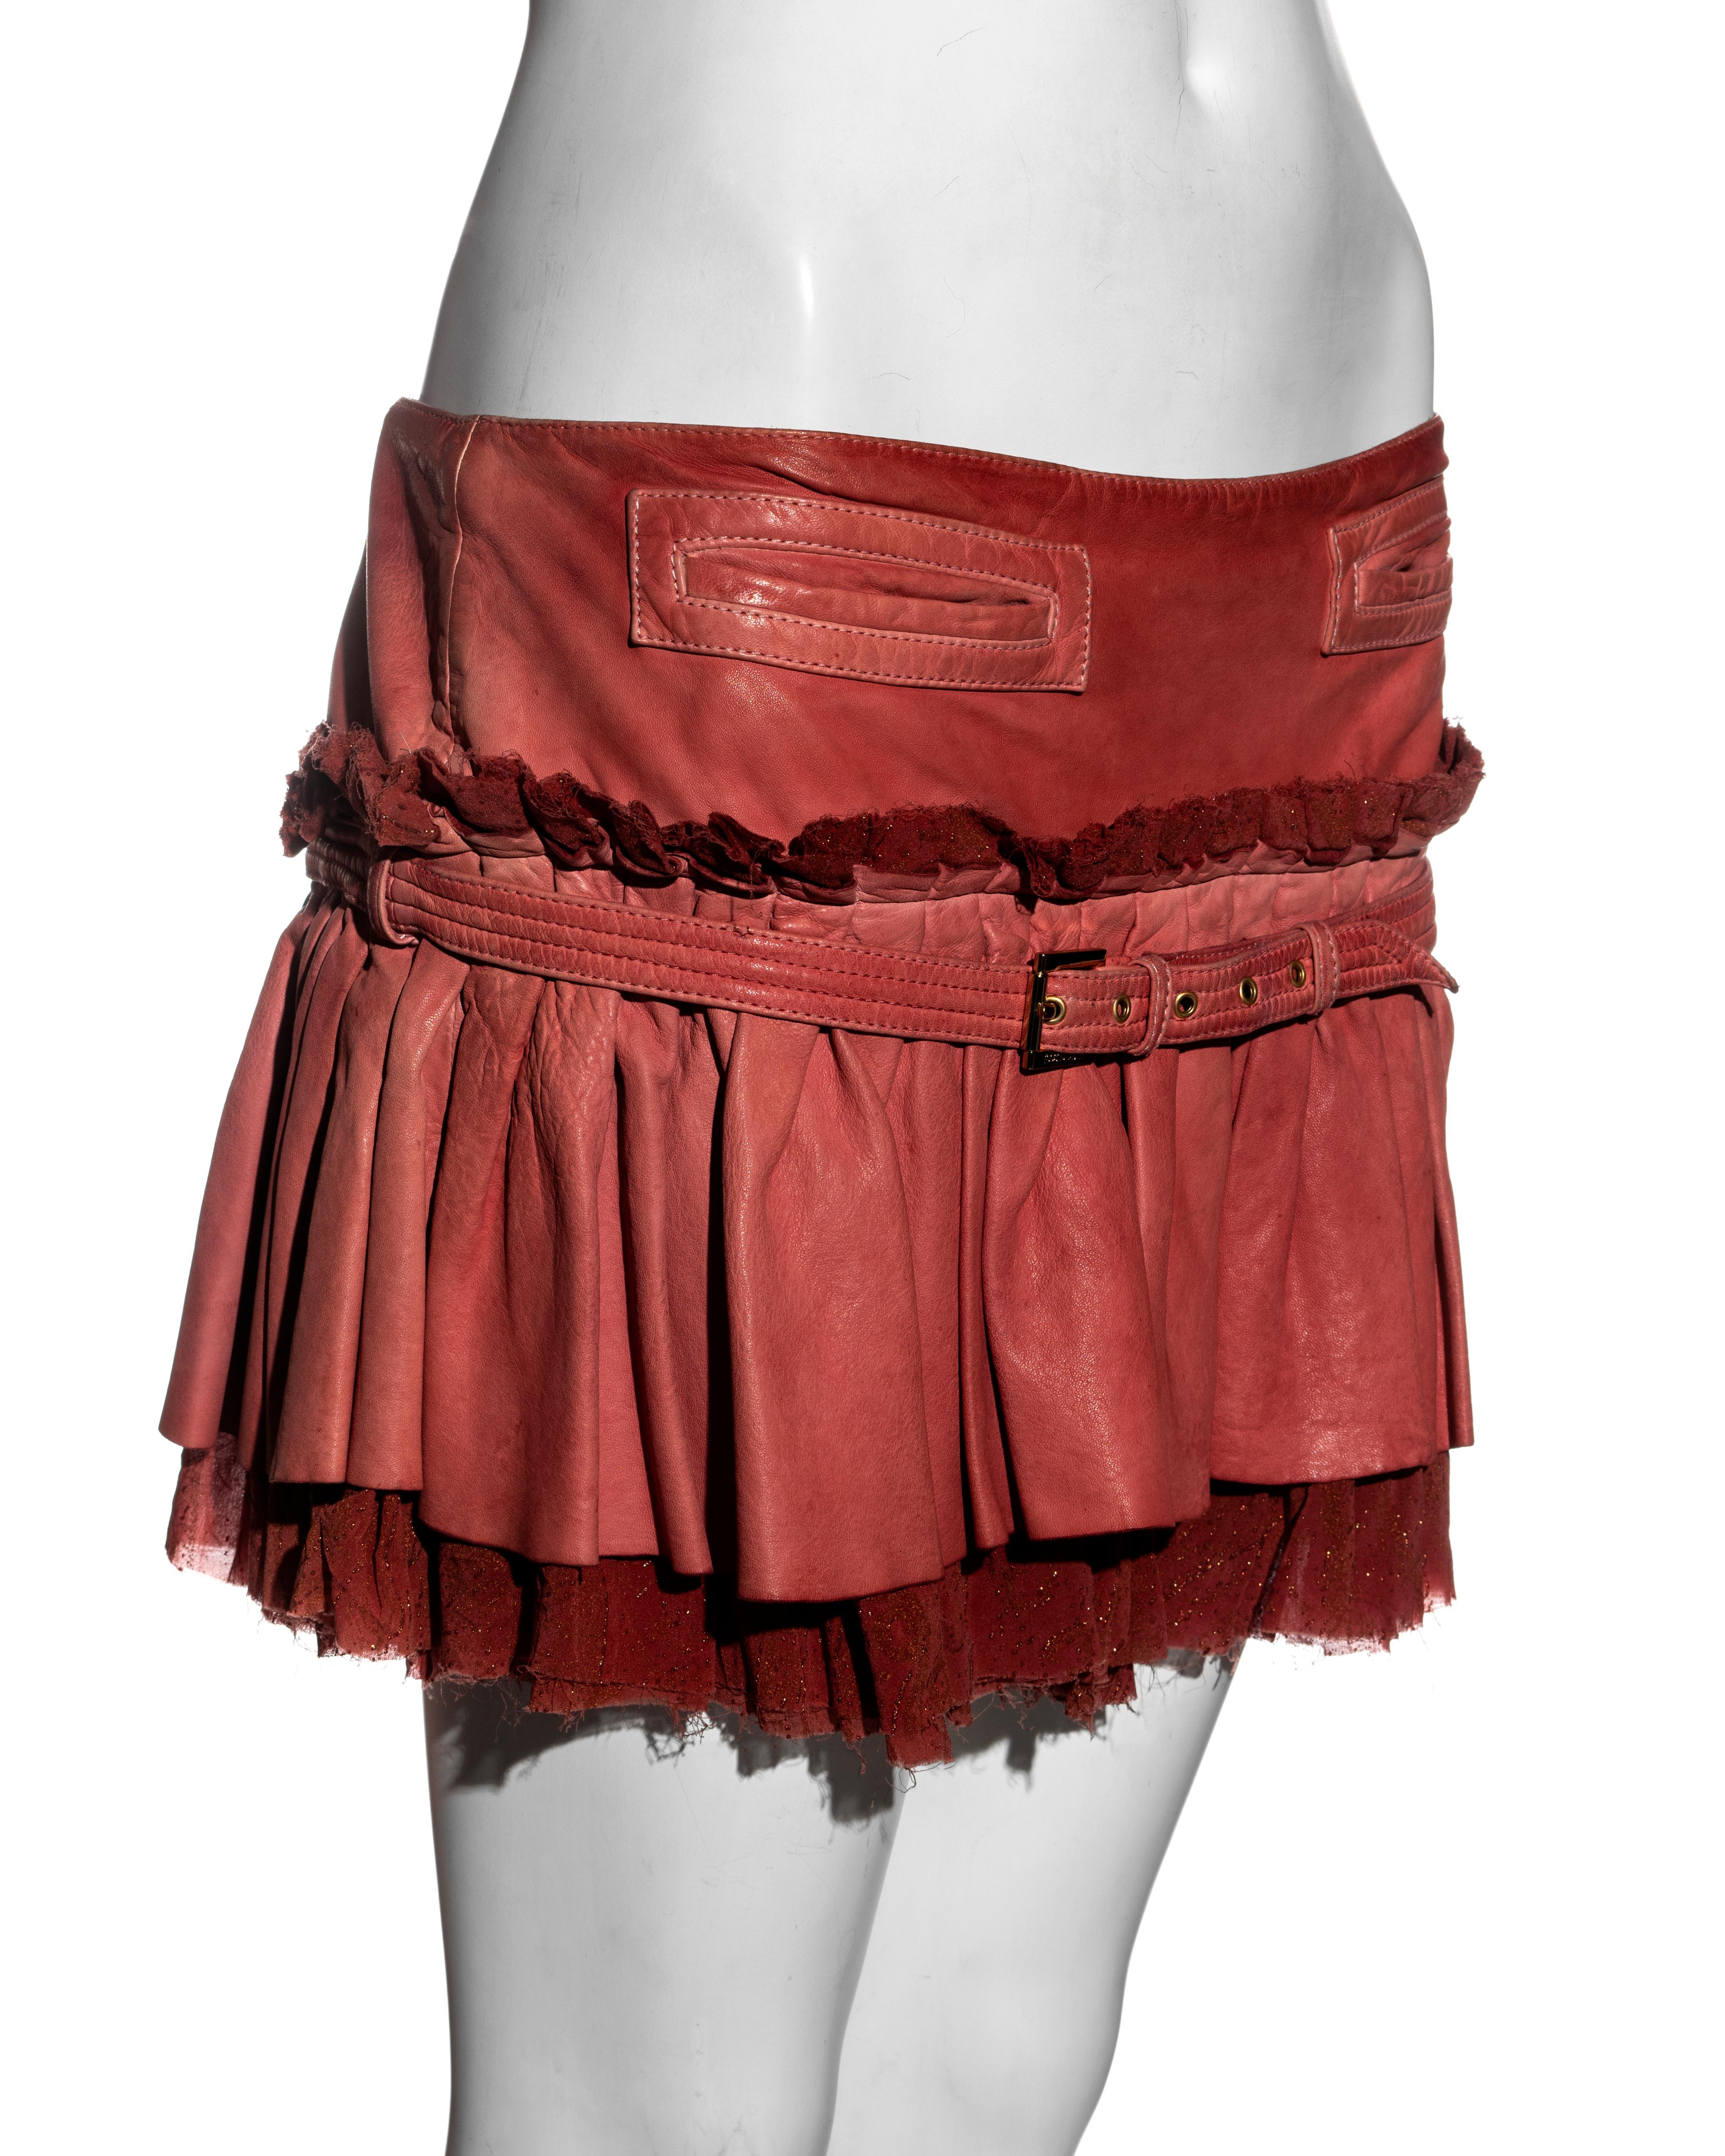 red low rise skirt